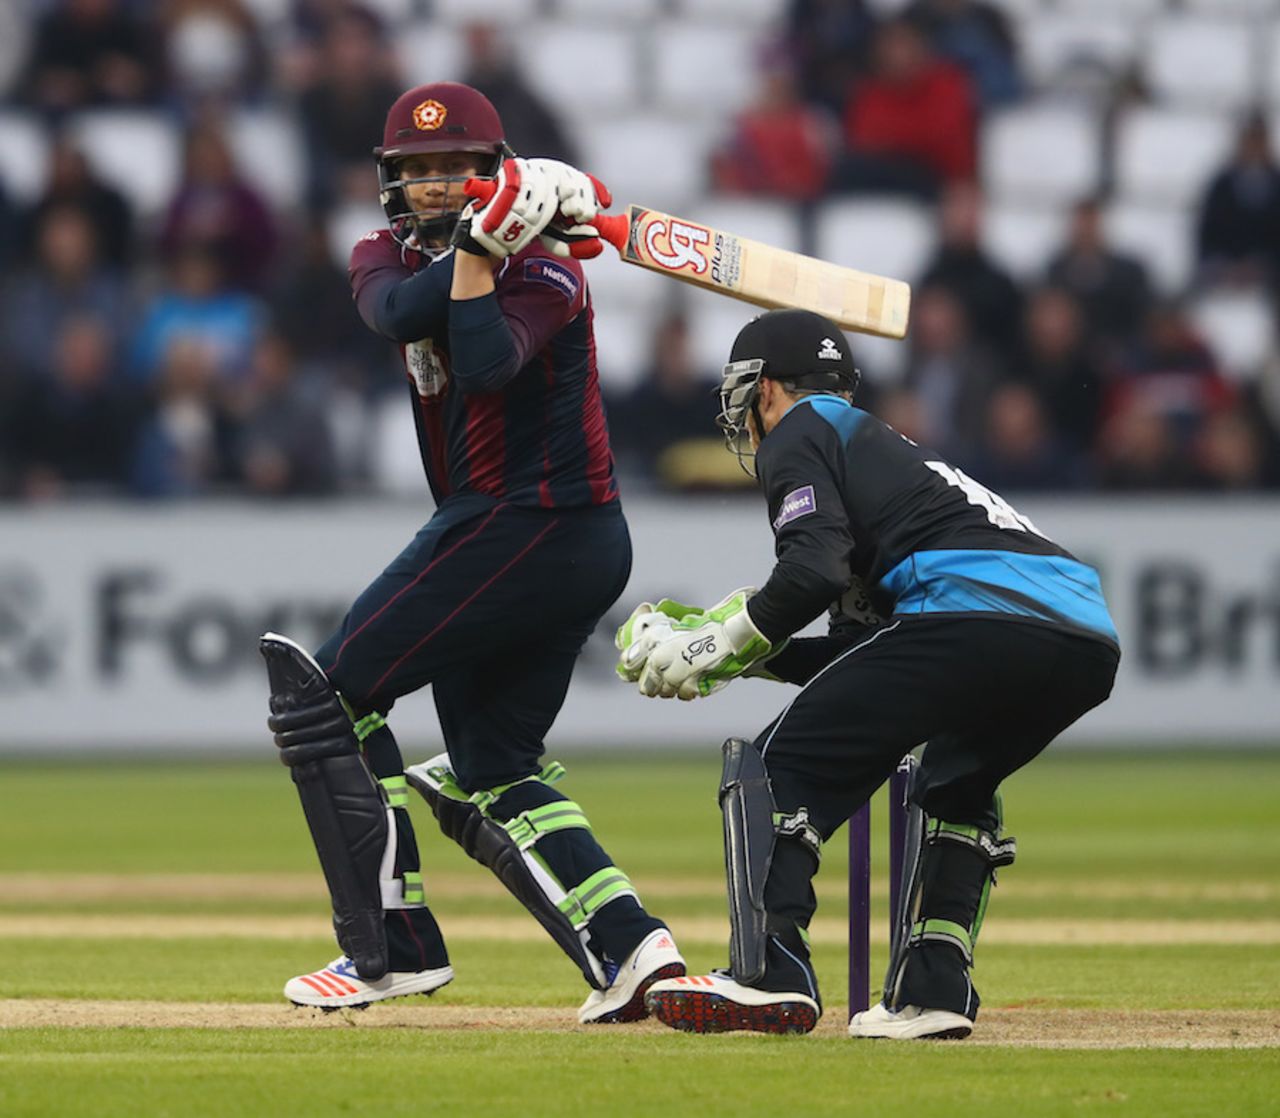 Josh Cobb's unbeaten half-century guided Northants to victory, Northamptonshire v Worcestershire, NatWest T20 Blast, North Group, Wantage Road, June 3, 2016